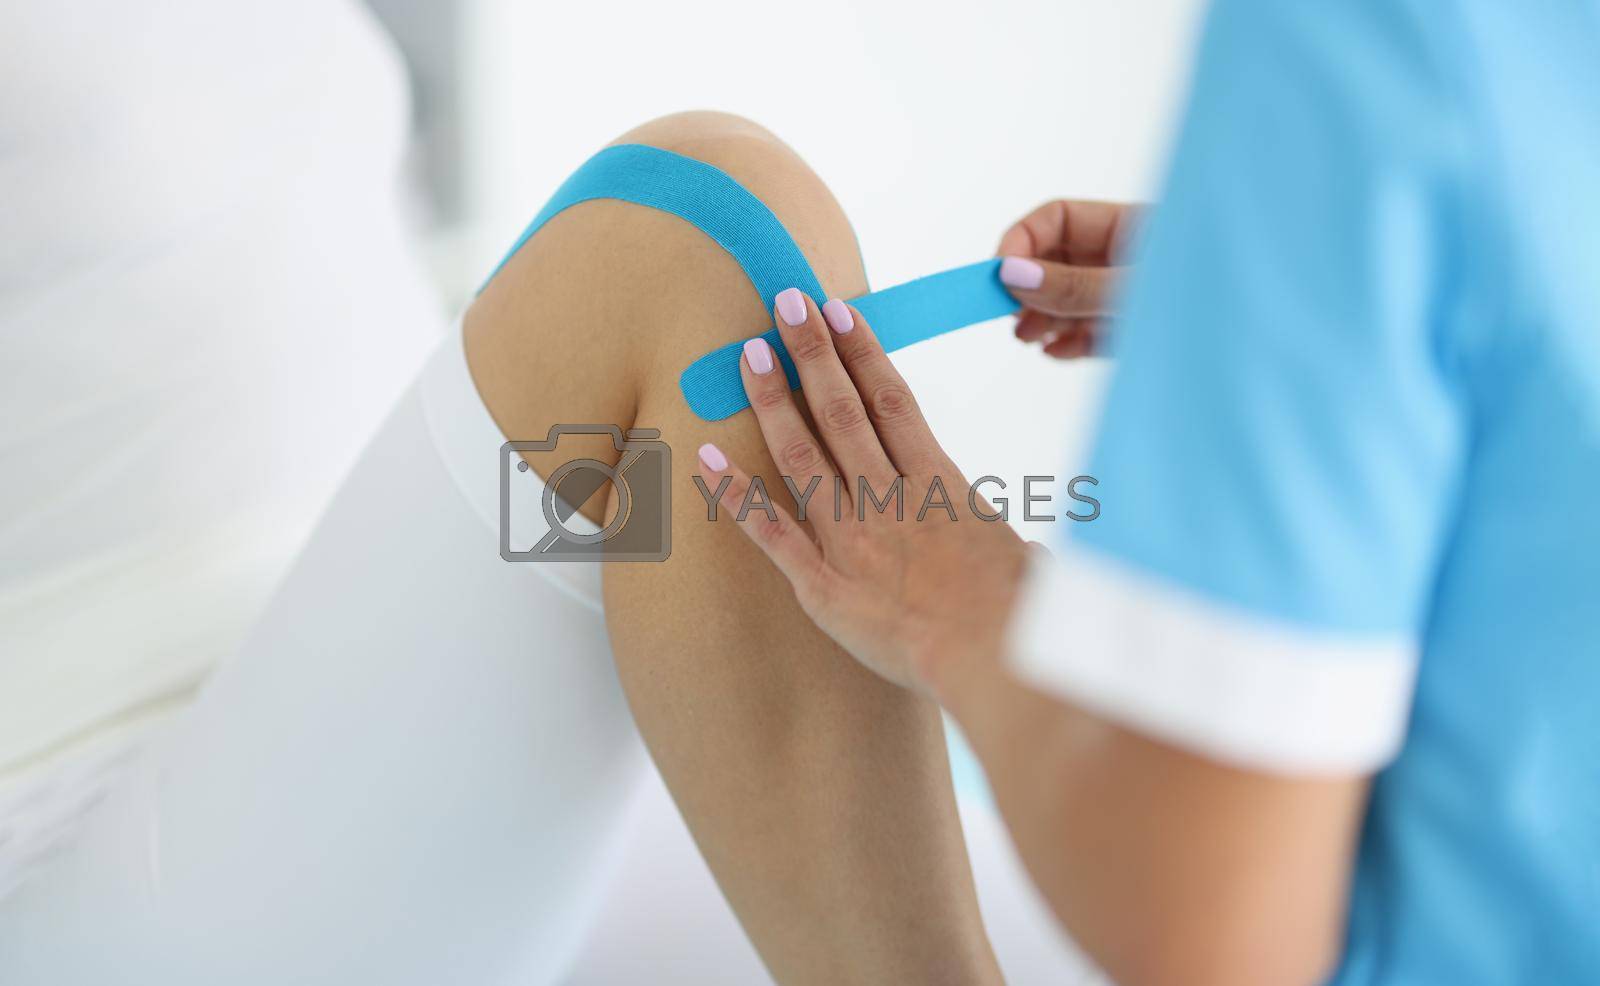 Royalty free image of Physiotherapist put kinesiology tape on clients knee, remove pain, rehabilitation center by kuprevich